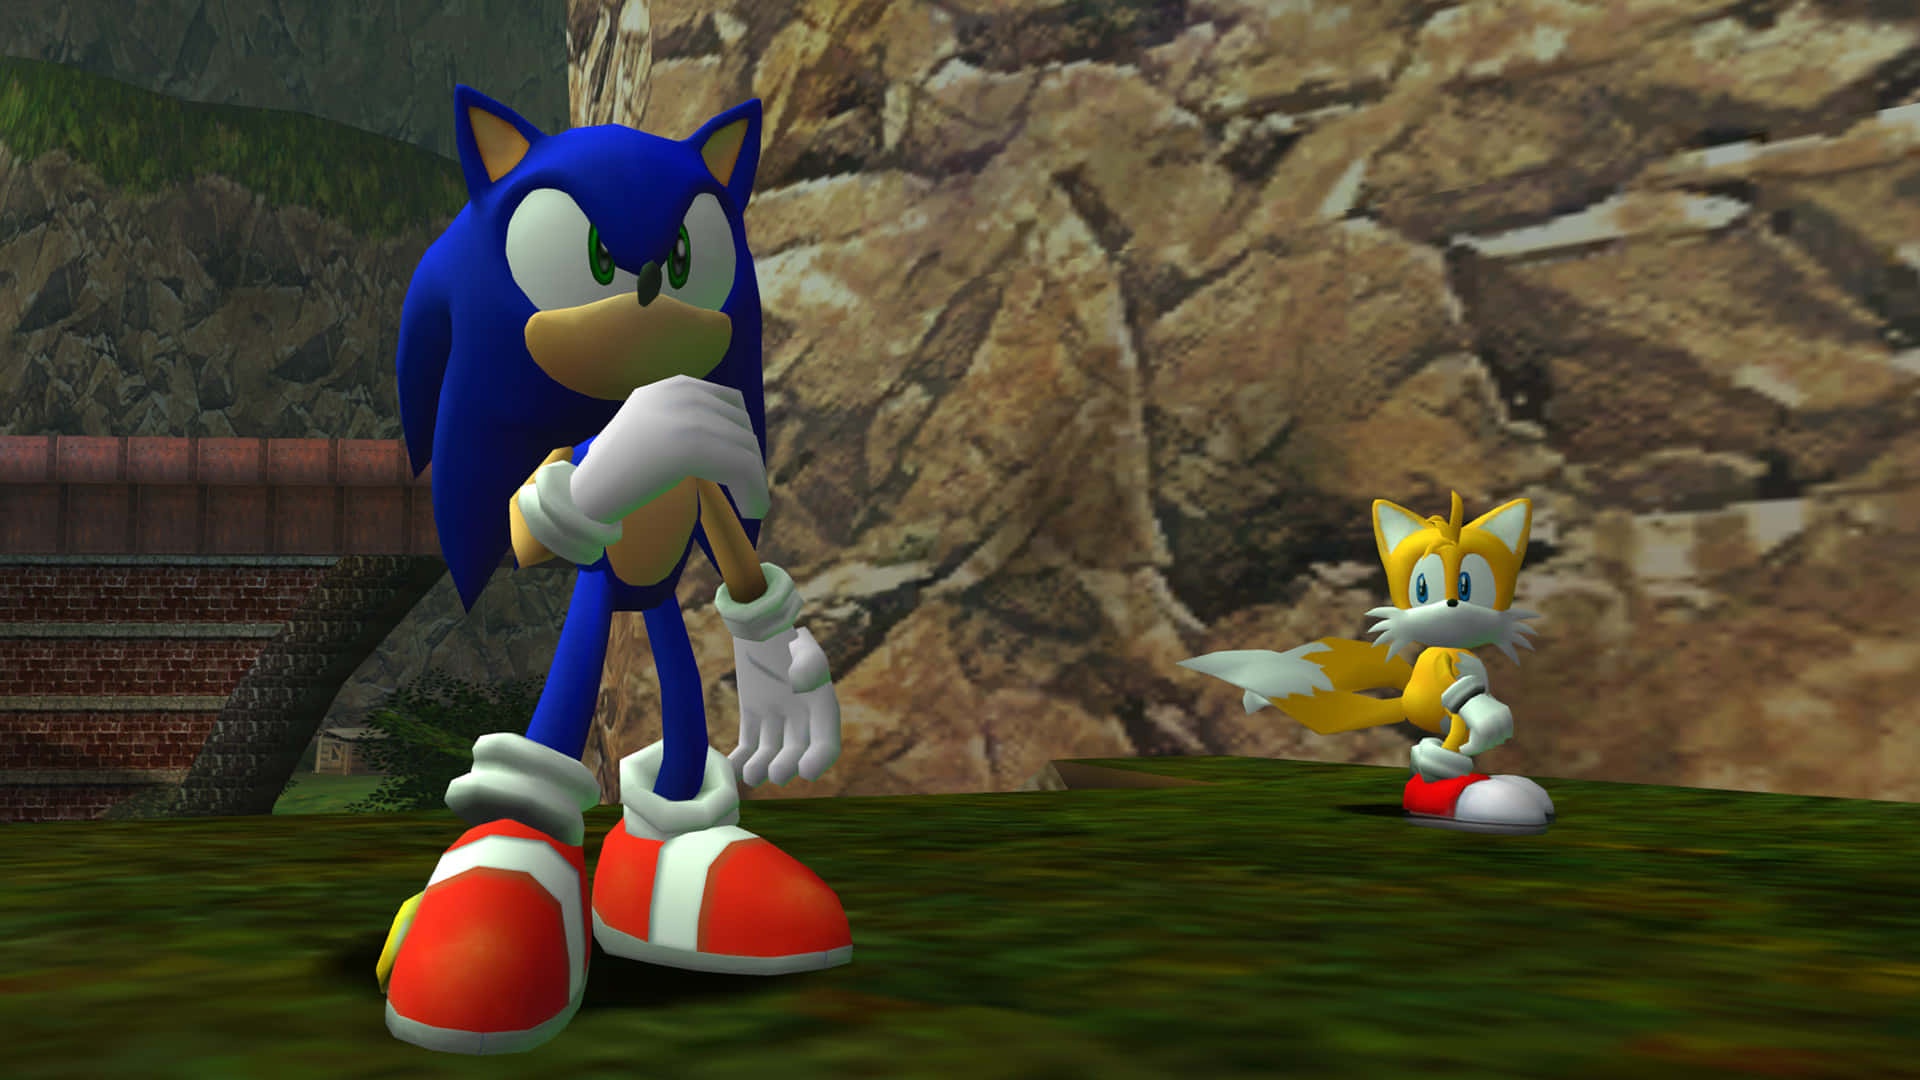 Sonic And Sonic The Hedgehog In A Game